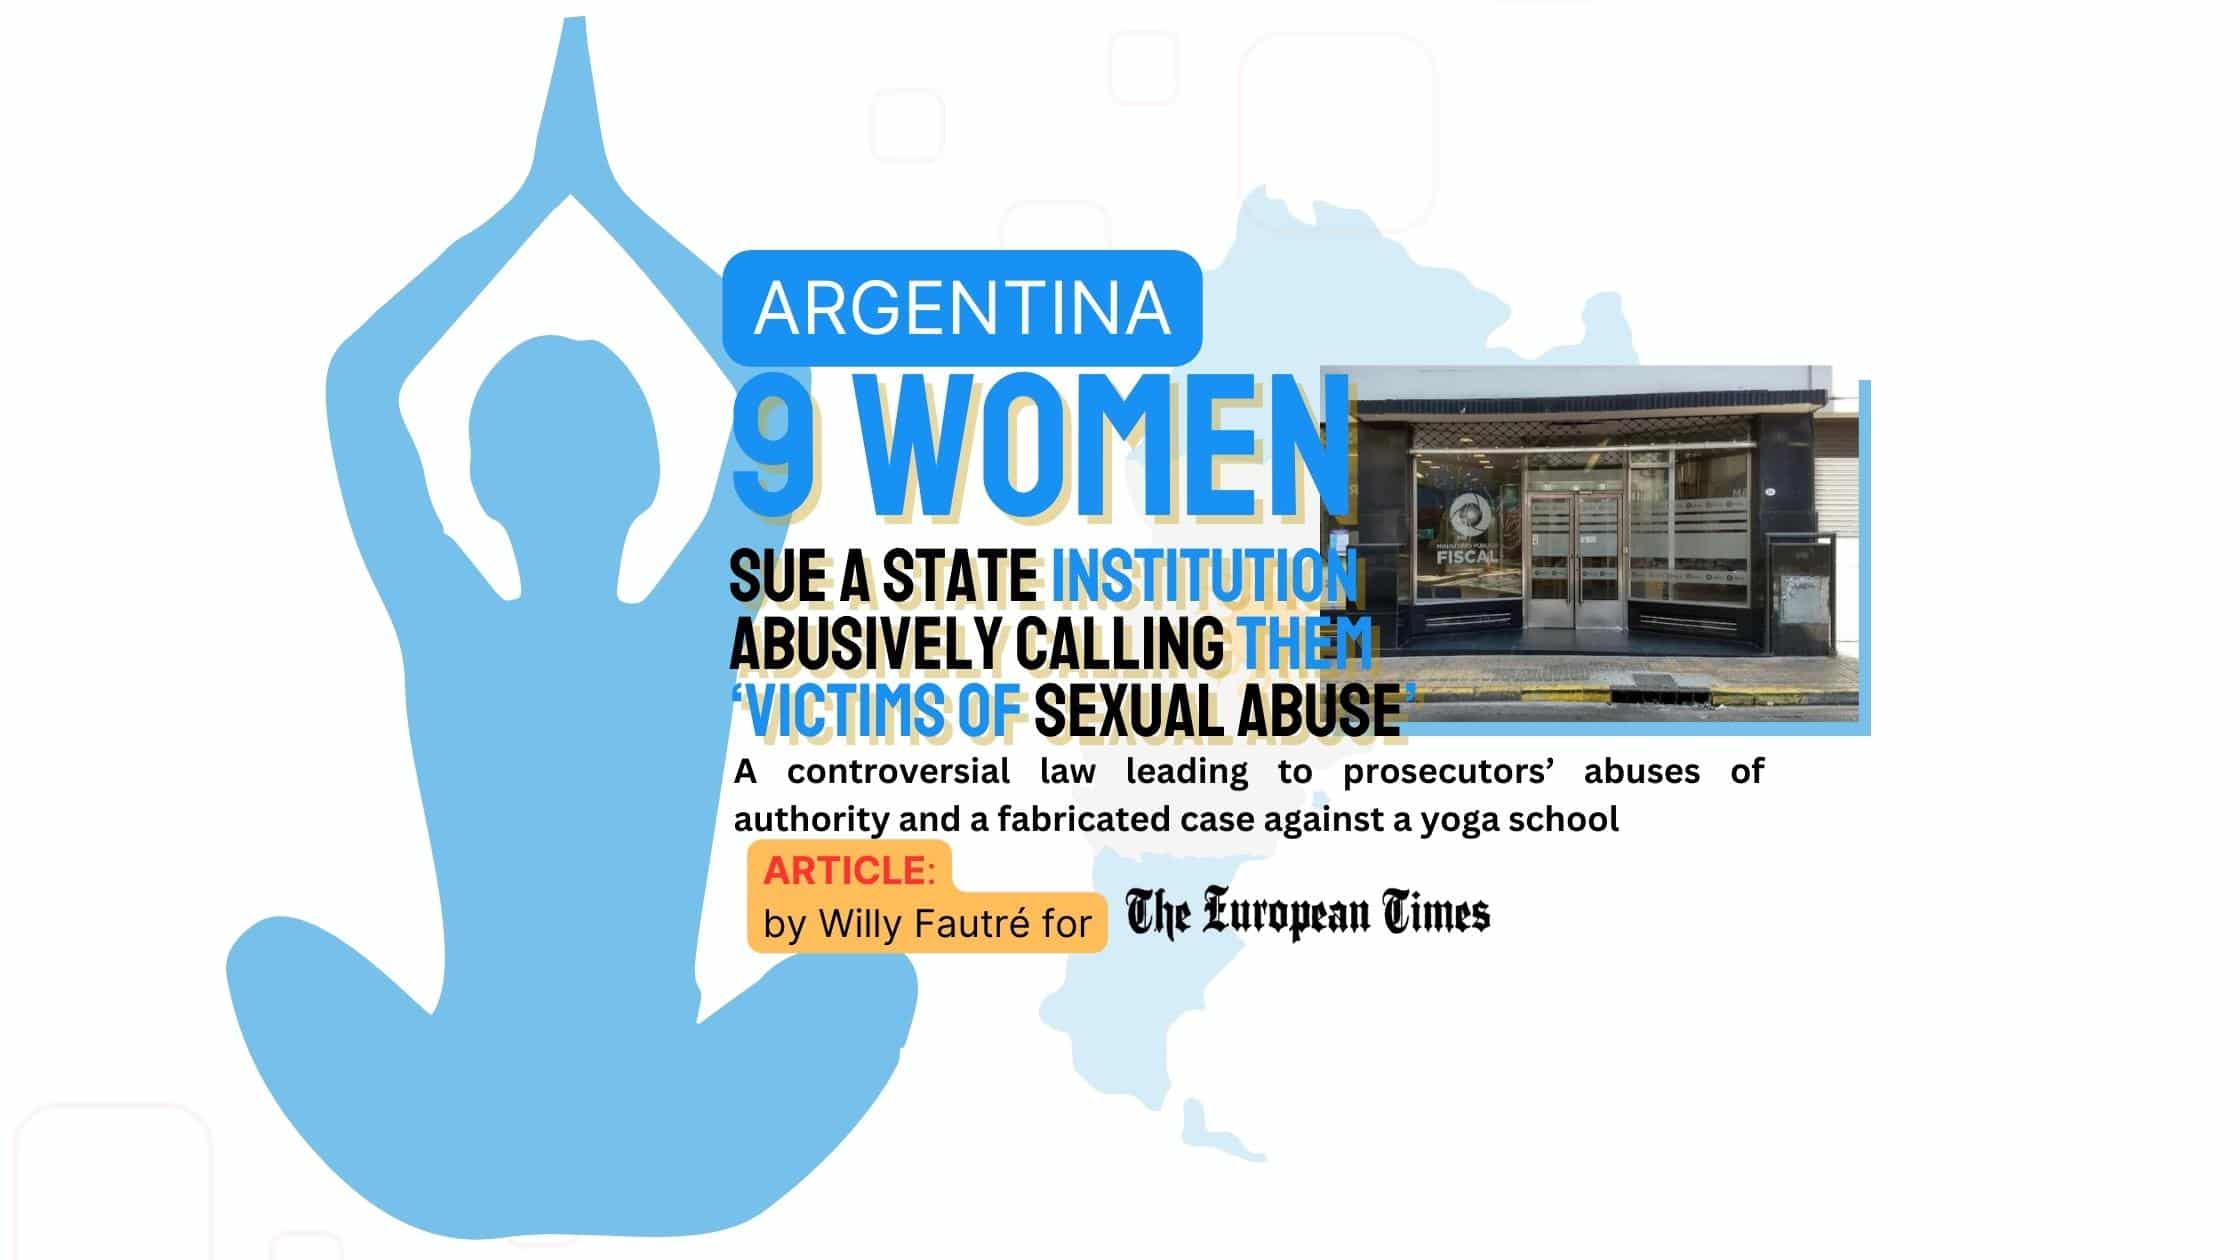 Argentina, 9 women sue a state institution abusively calling them ‘victims of sexual abuse’